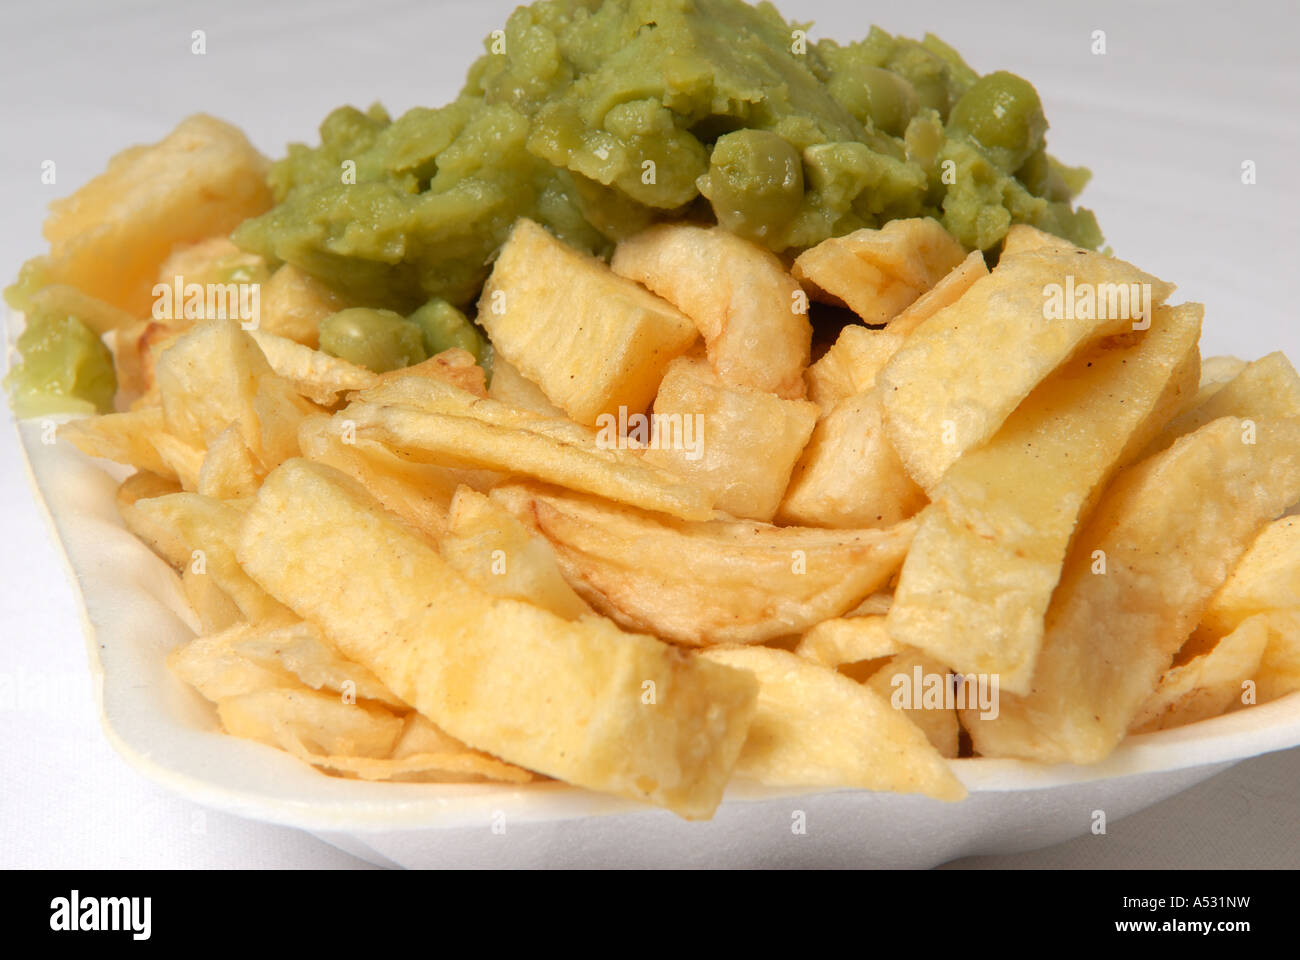 Fish and chips Take away Food. Stock Photo